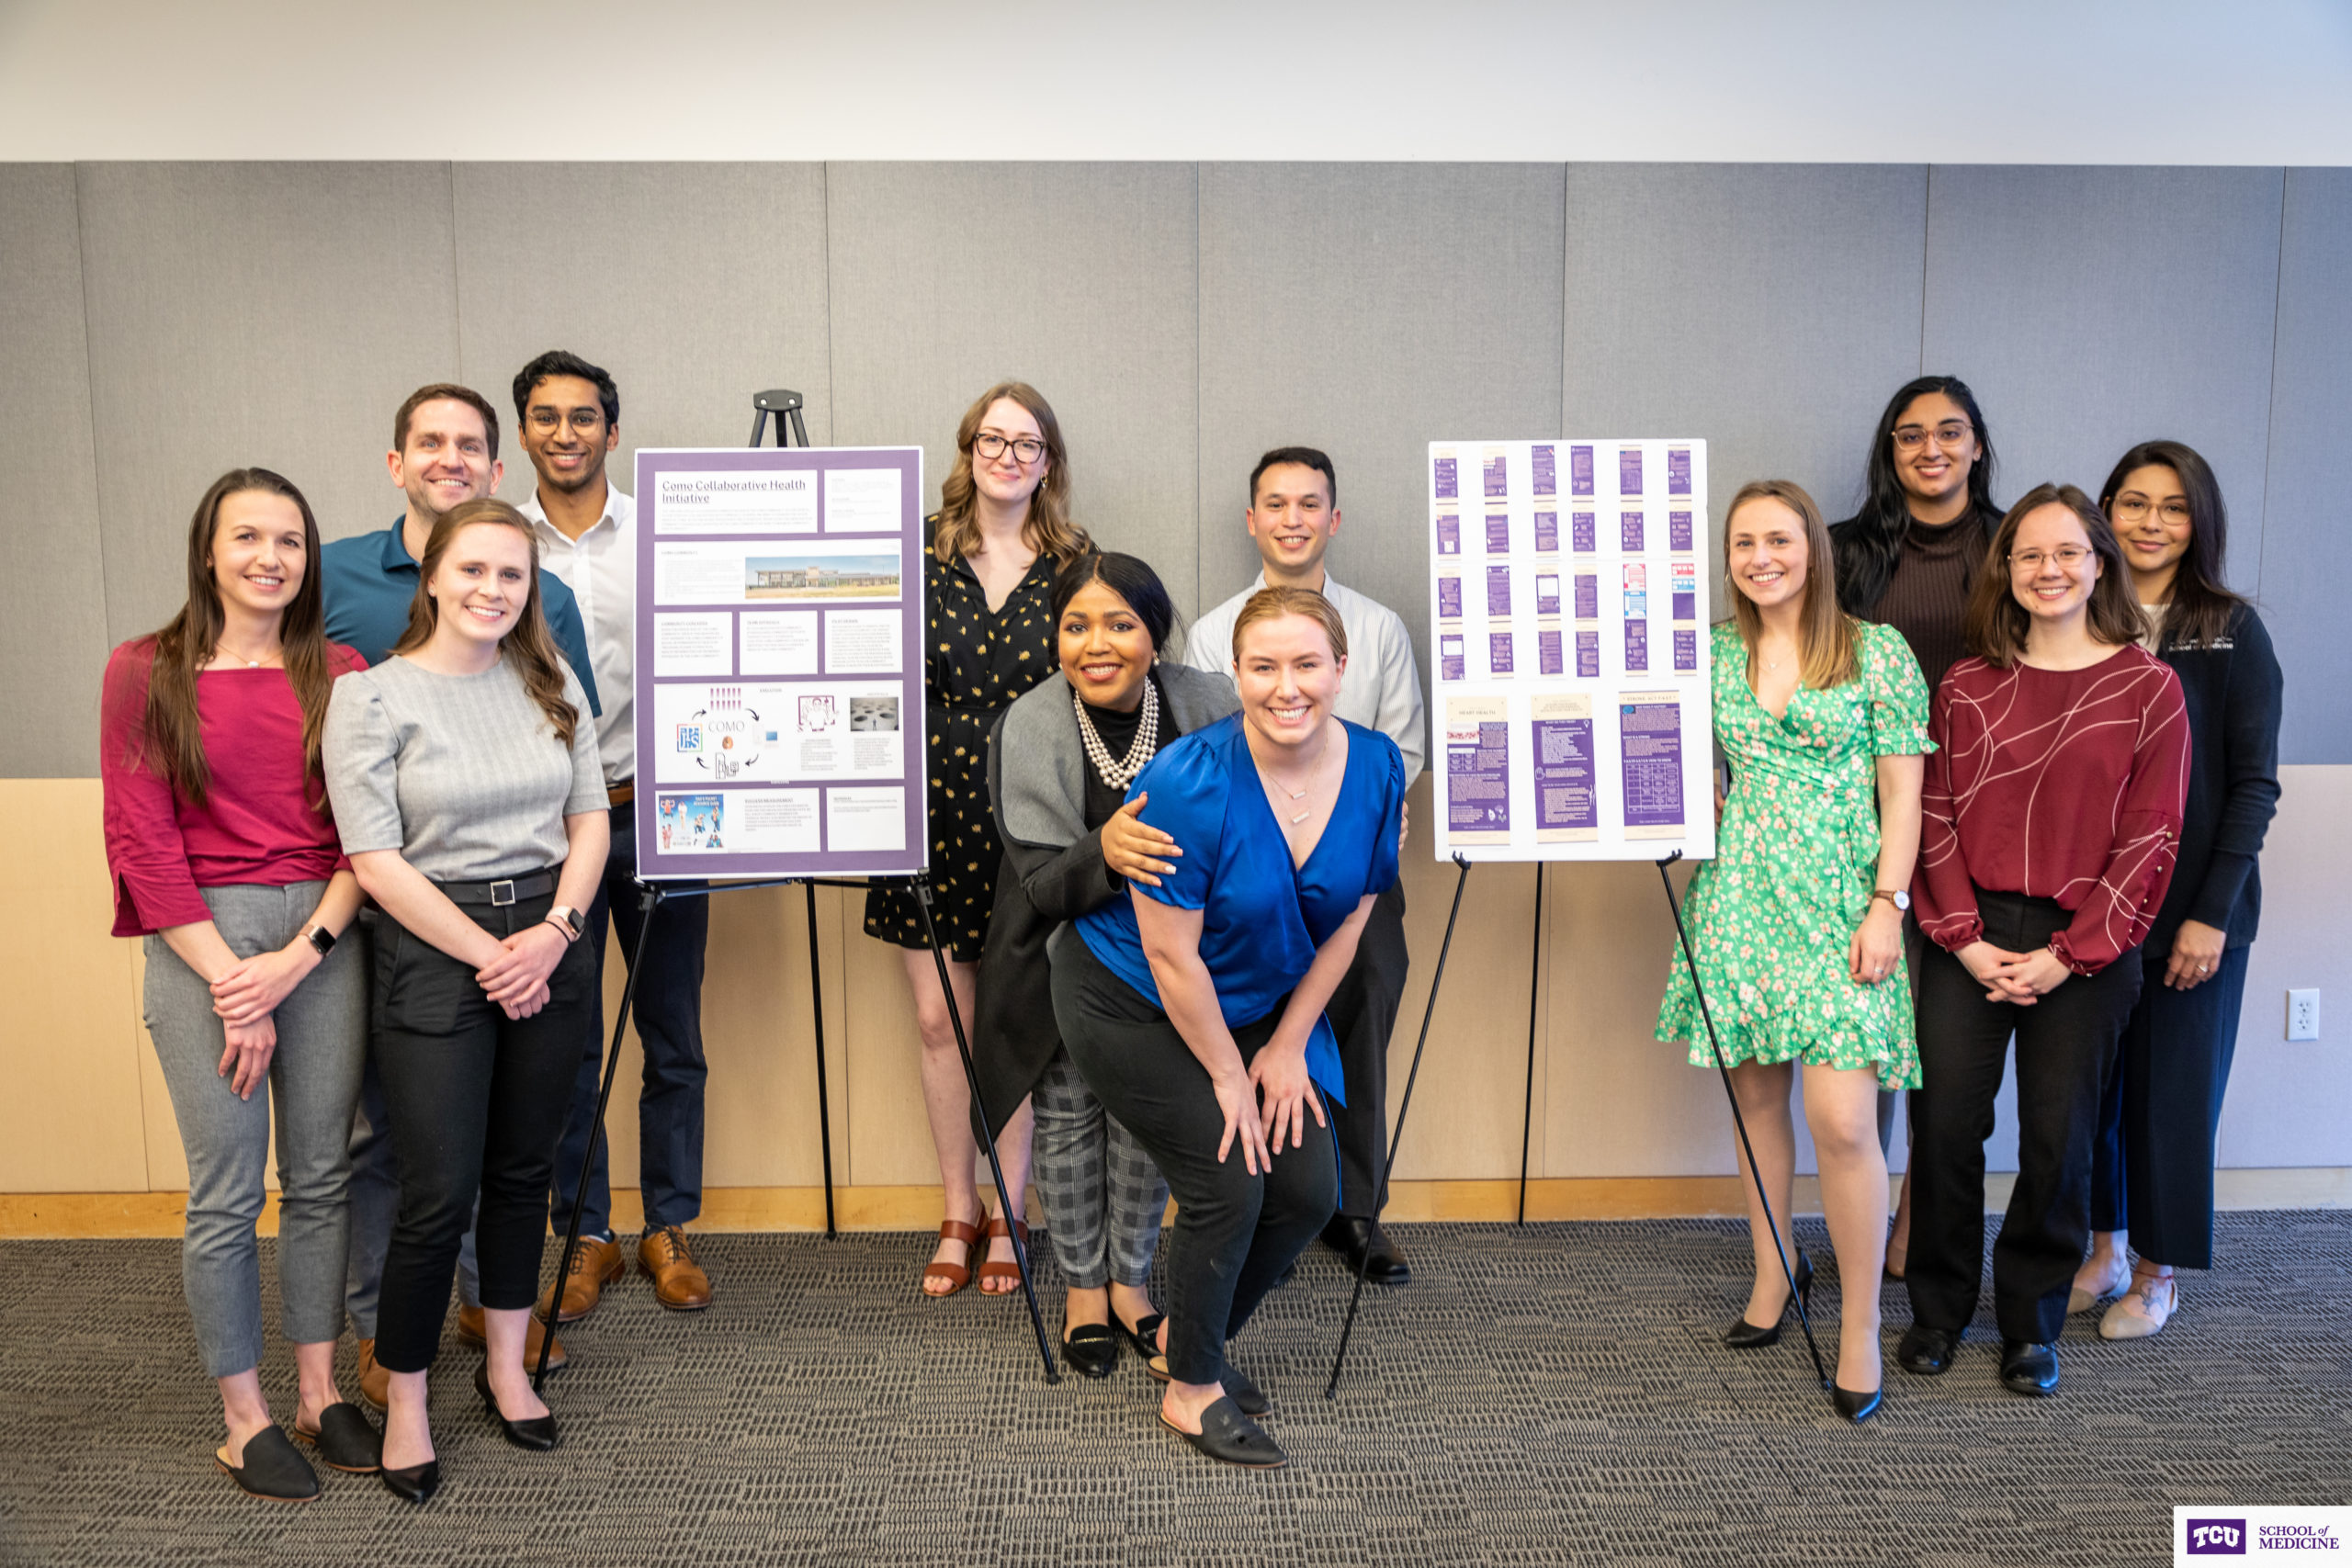  TCU School of Medicine THRIVE Learning community members of Timu and Virtud houses present their poster for the COMO community at the first annual P4P: Community Impact Project Celebration. The members pictured above are (from left to right): Meaghan Rousett, Grace Newell, Kyle Schneider, Ruthvik Allala, Nathalie Scherer, Charna Kinard, Samantha Evans, Kevin Rivera, Mallory Thompson, Kavneet Kaur, Mei Mei Edwards and Ivette Ivila.